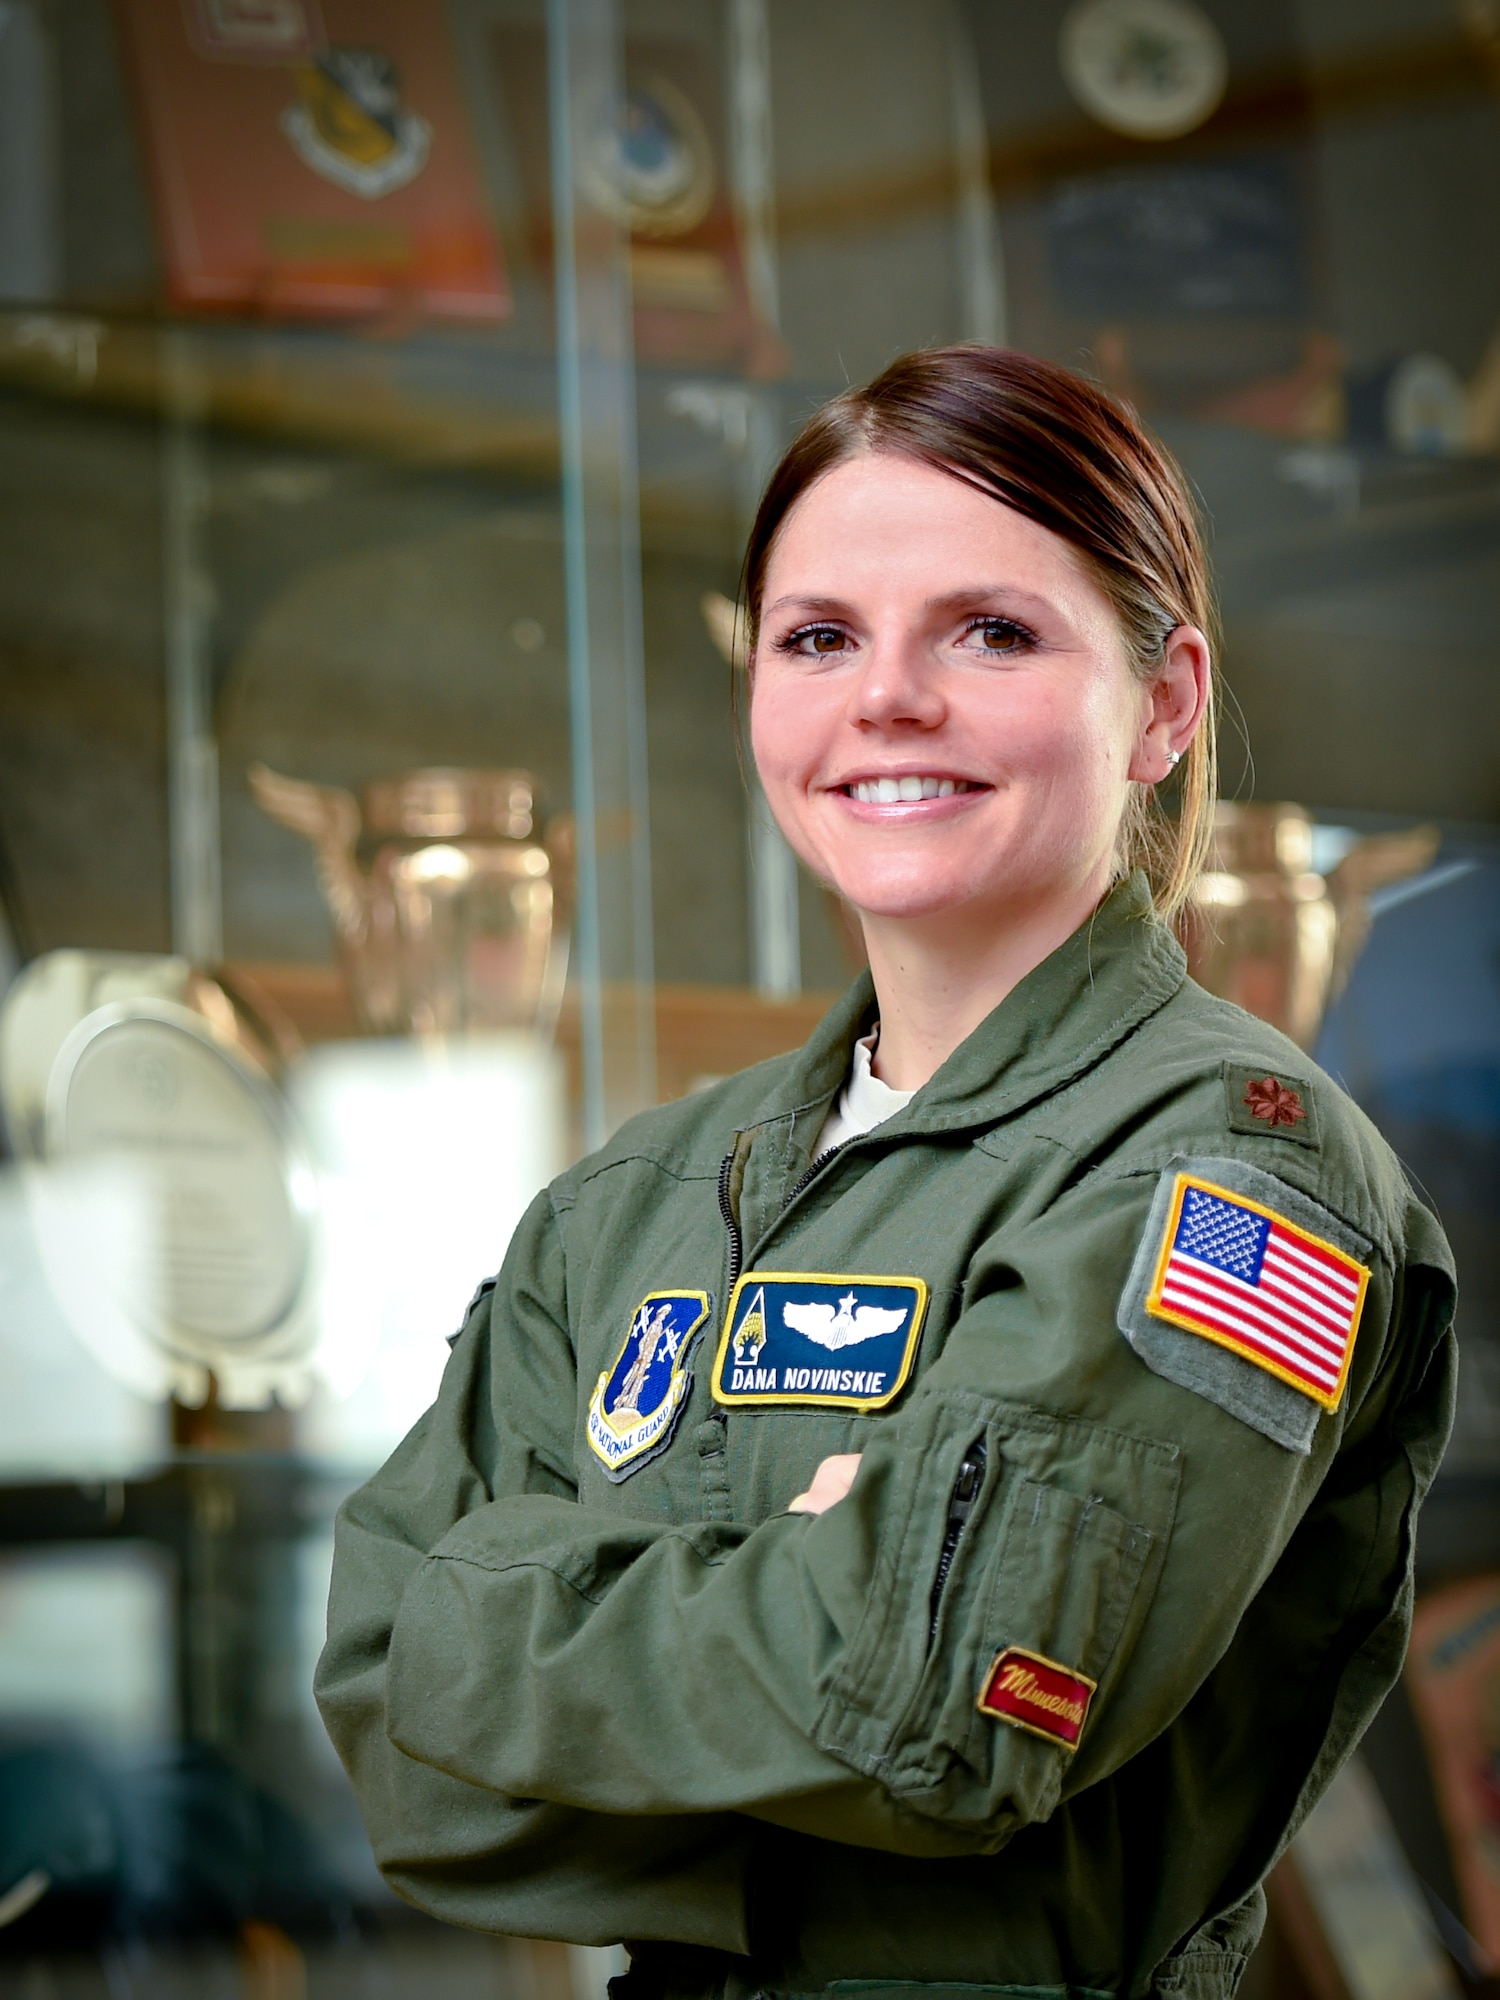 Dana Novinskie, a pilot at the 109th Airlift Squadron, a part of the 133rd Airlift Wing, has been flying since she was 22. This year, she became the first female instructor pilot the wing has ever had.